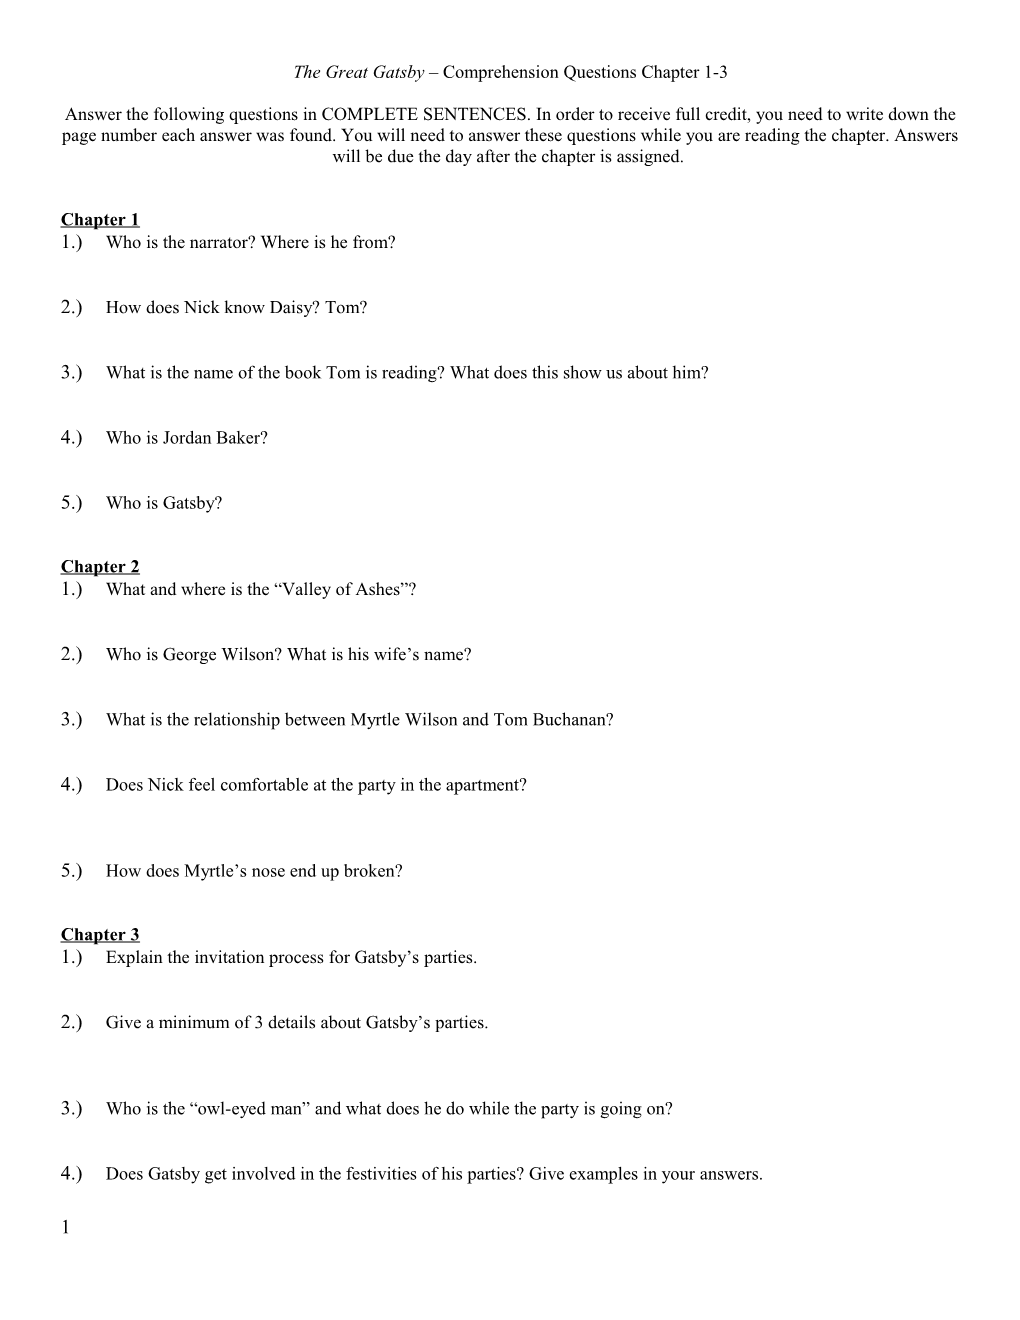 The Great Gatsby Comprehension Questions Chapter 1-3